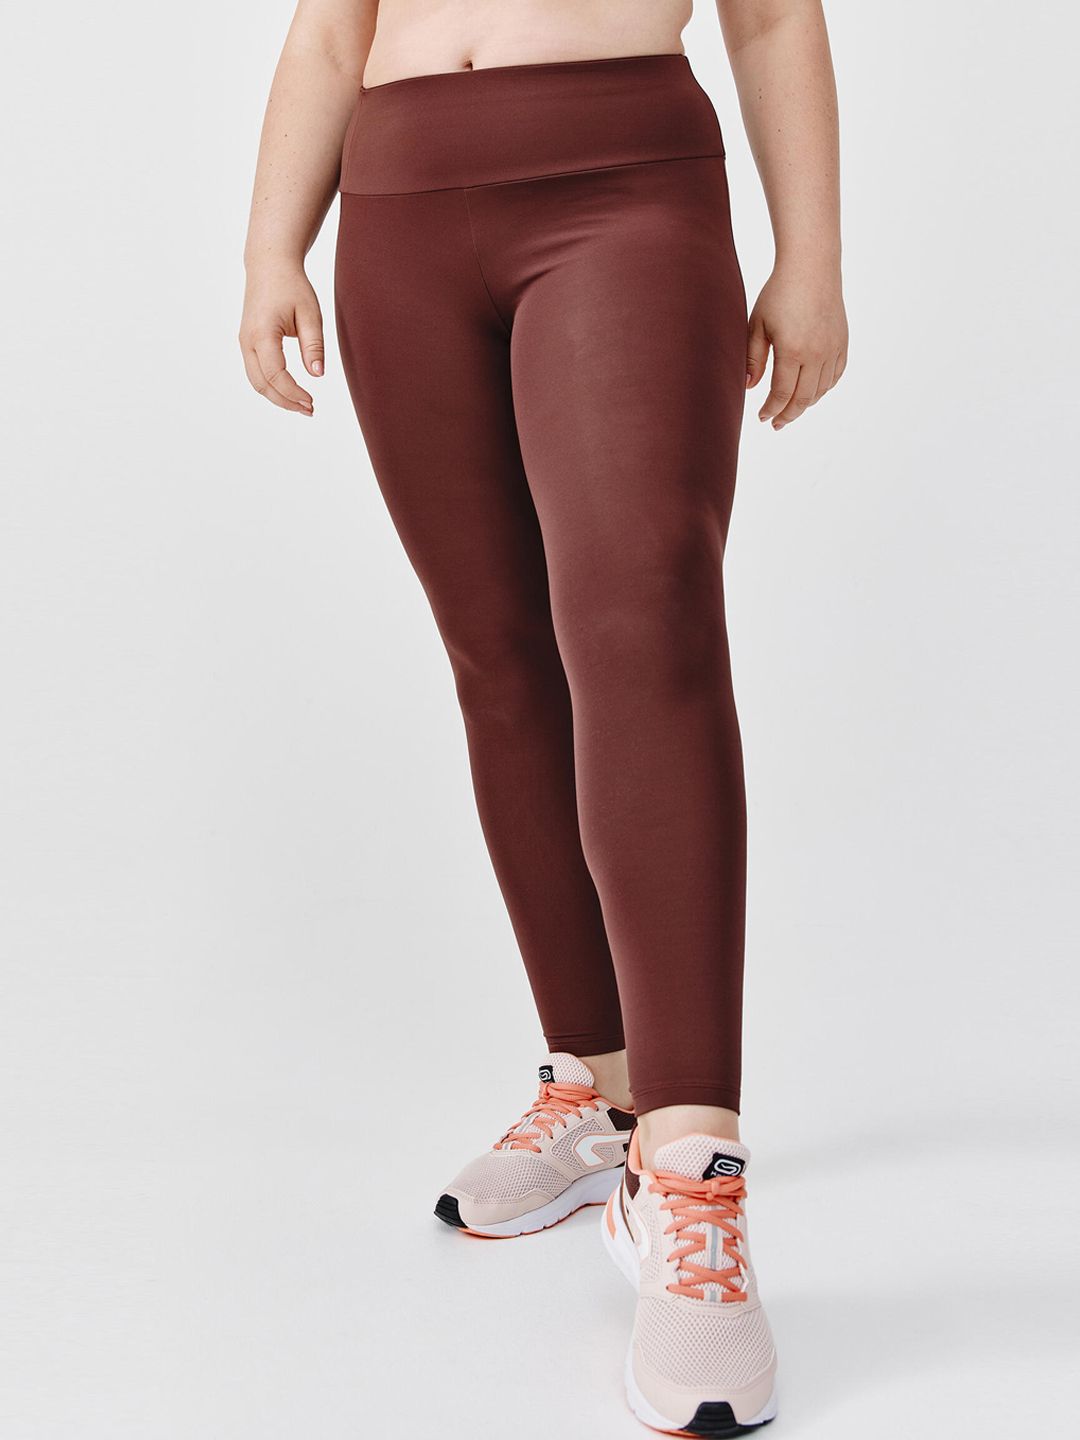 Kalenji By Decathlon Women Brown Solid Running Long Tights - Price History